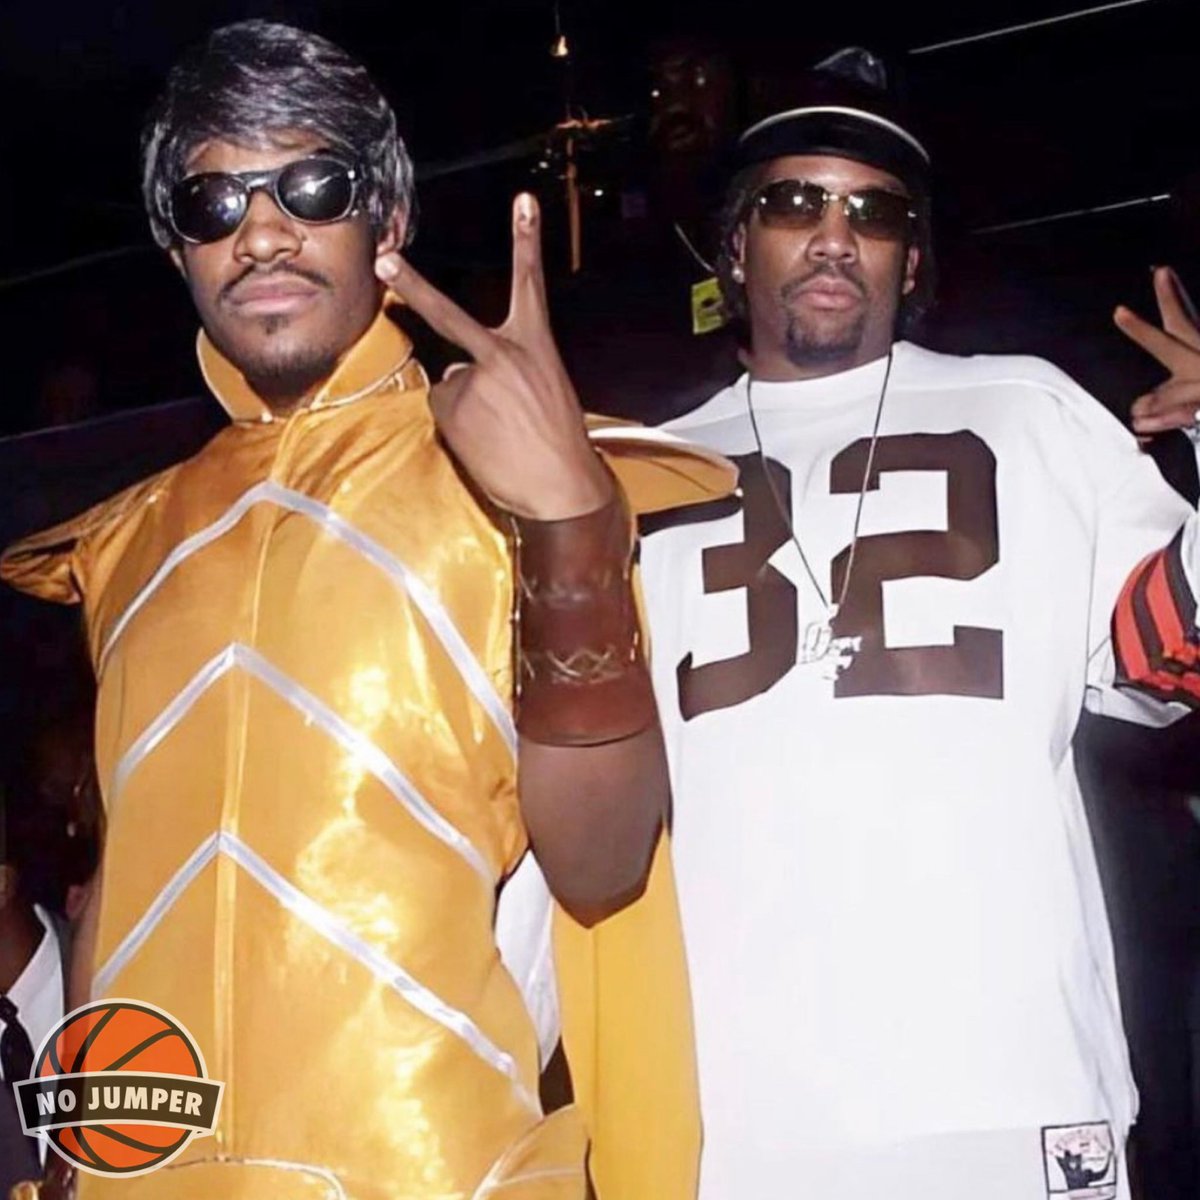 Billboard named OutKast as the greatest rap group of all time. Do you agree?